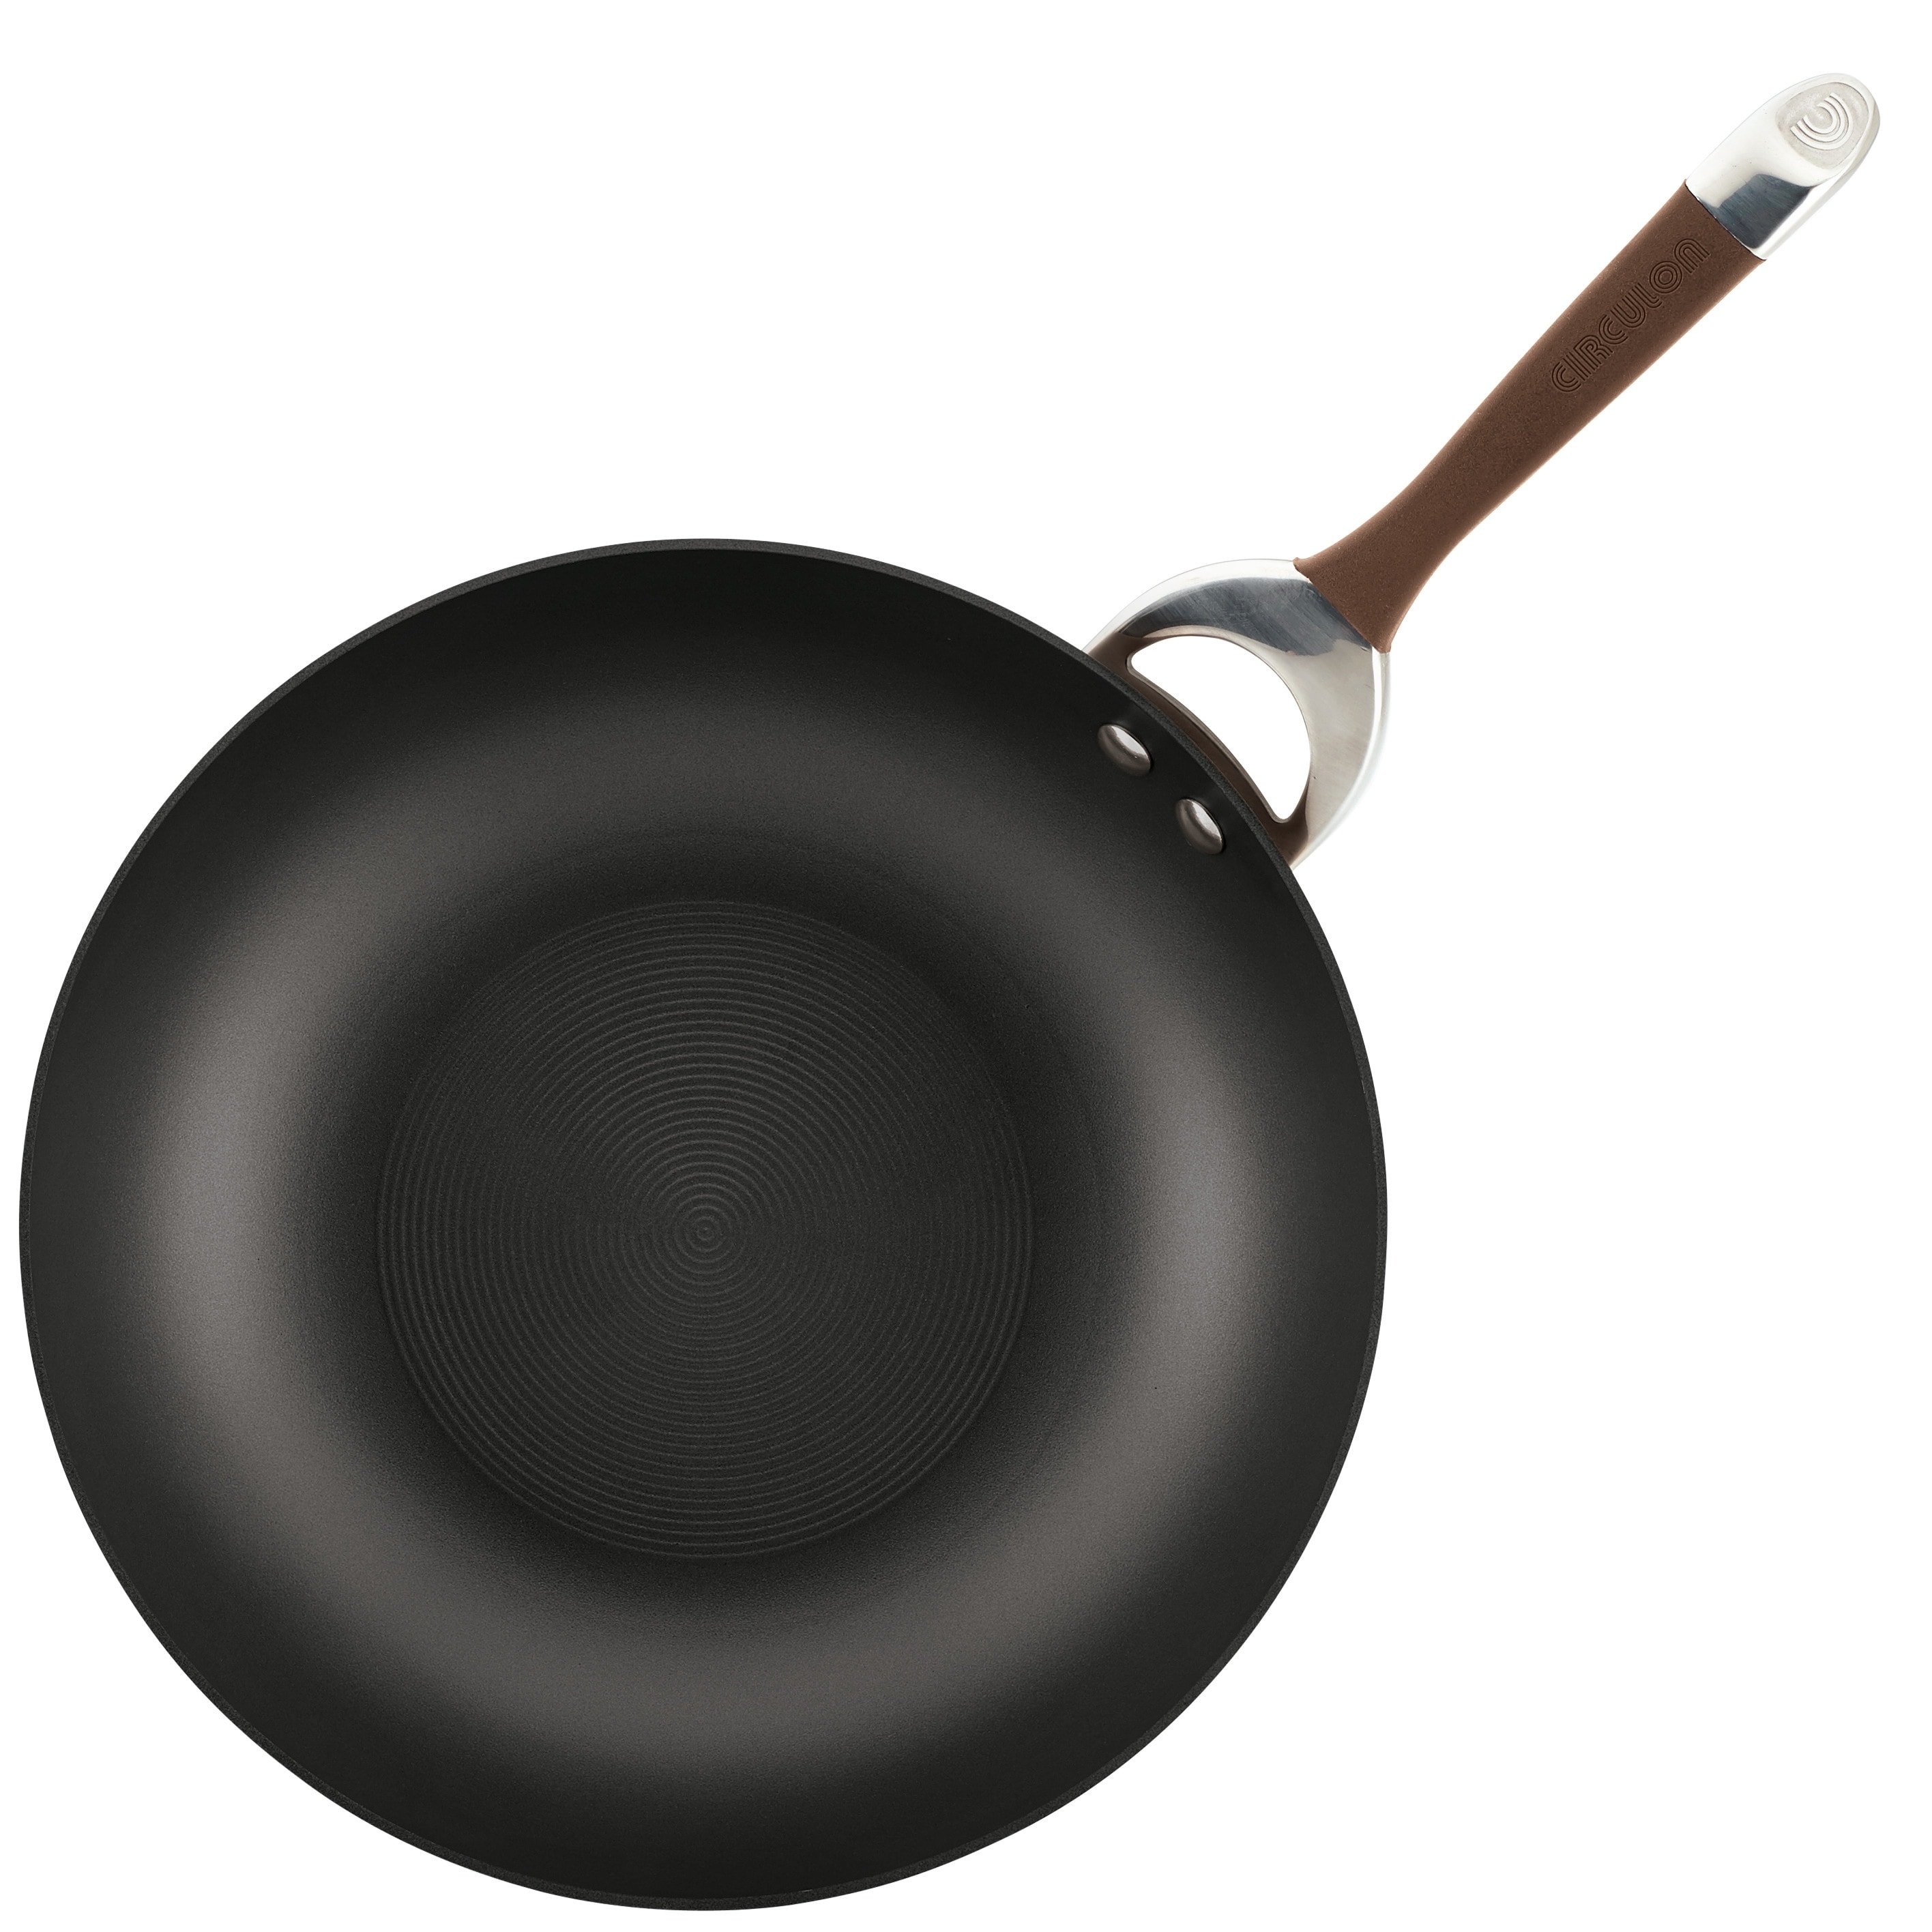 https://ak1.ostkcdn.com/images/products/is/images/direct/e84ed1b79834405cdb5f50dce9d2943051ba3ca1/Circulon-Symmetry-Hard-Anodized-Nonstick-Induction-Chef-Pan-with-Lid%2C-12-Inch%2C-Chocolate.jpg